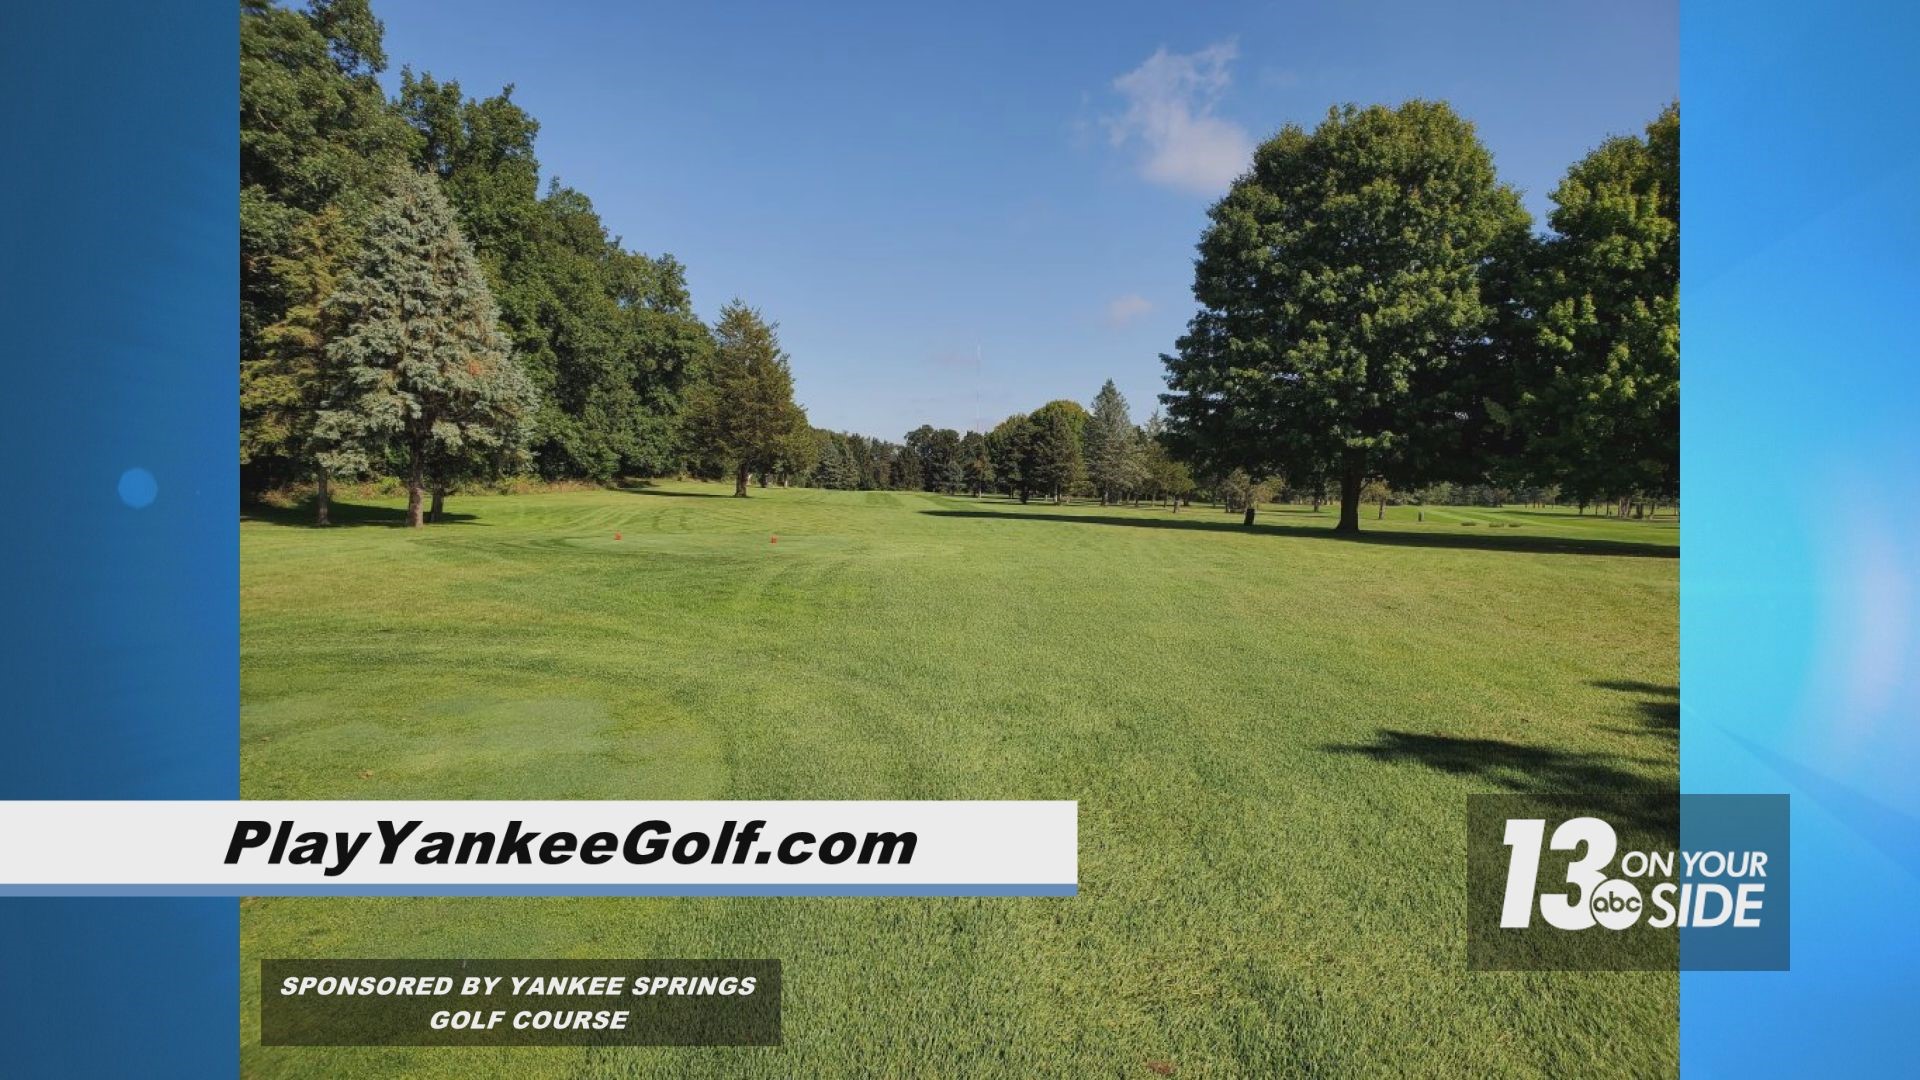 Yankee Springs Golf Course in Wayland is a family-owned business and with new ownership in recent years the upgrades are many.